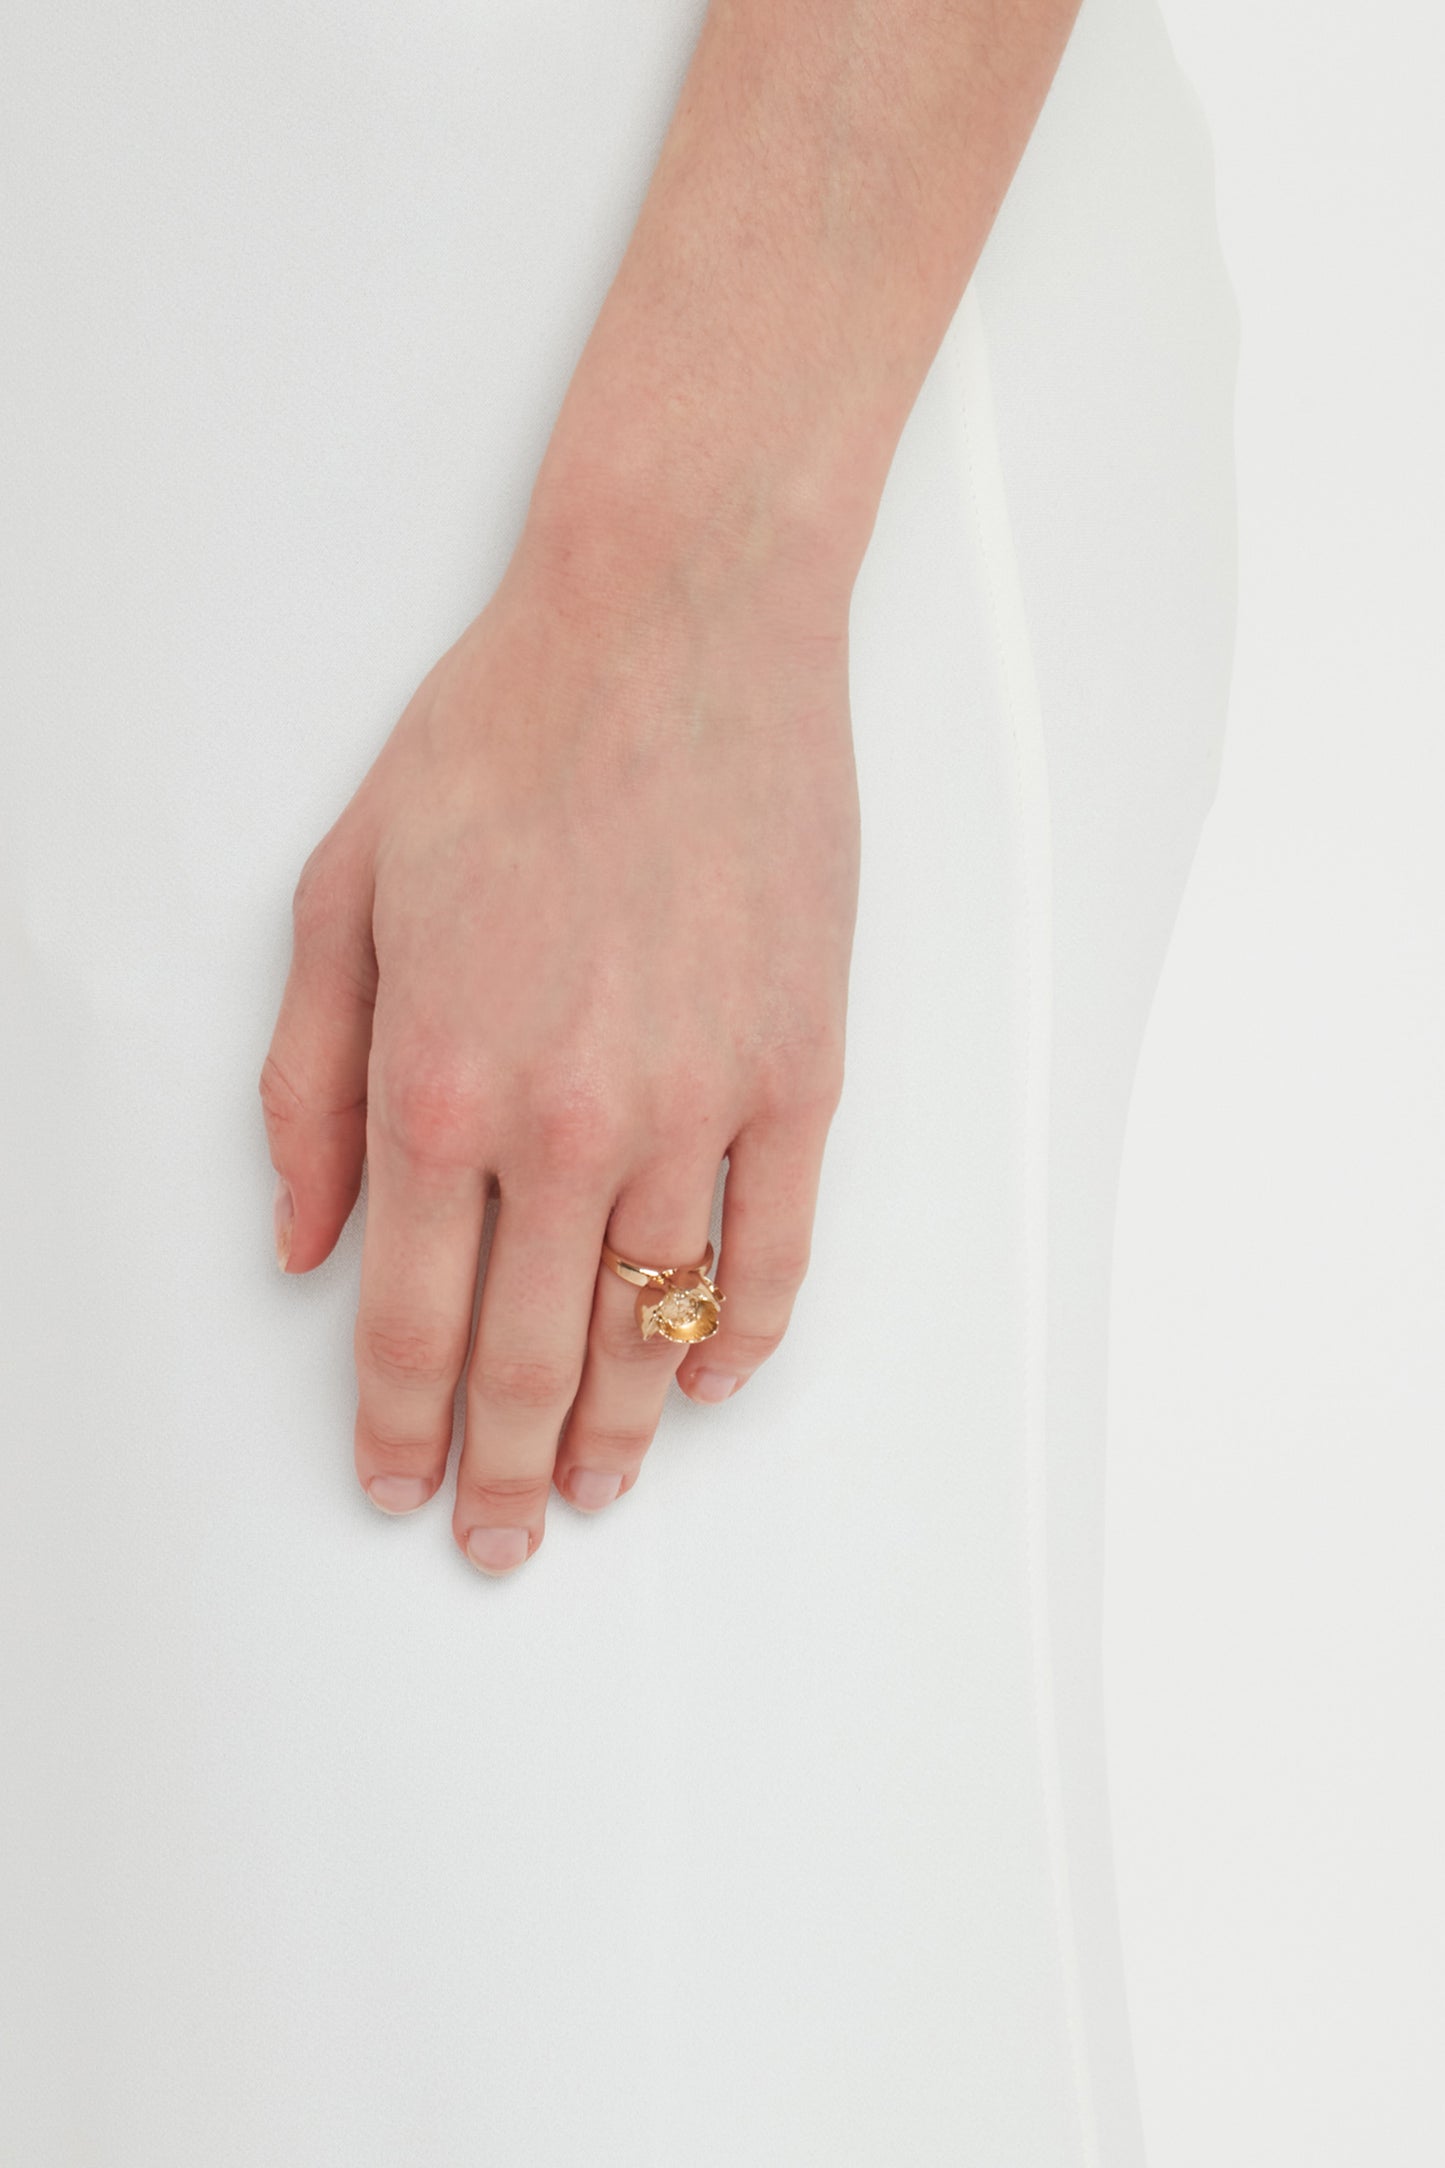 A woman’s hand wearing an Exclusive Camellia Flower Ring In Gold by Victoria Beckham, handcrafted in Italy, rests elegantly against a white fabric background.